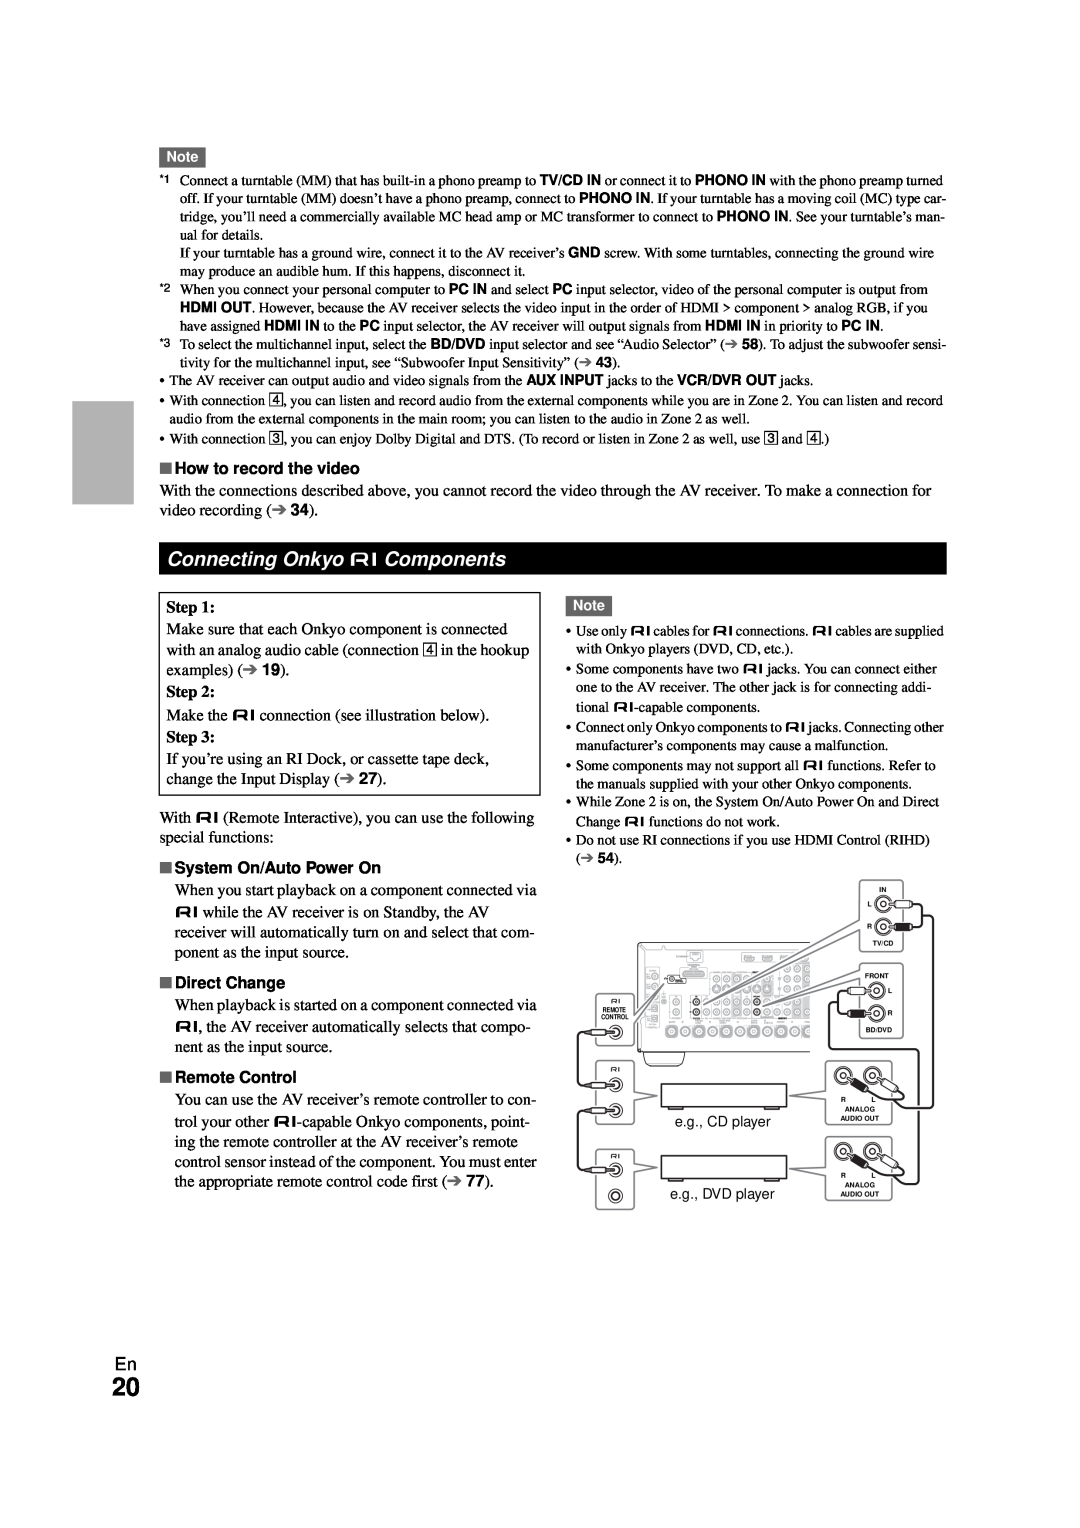 Onkyo HT-RC270 instruction manual Connecting Onkyo uComponents, How to record the video, Direct Change, Remote Control 